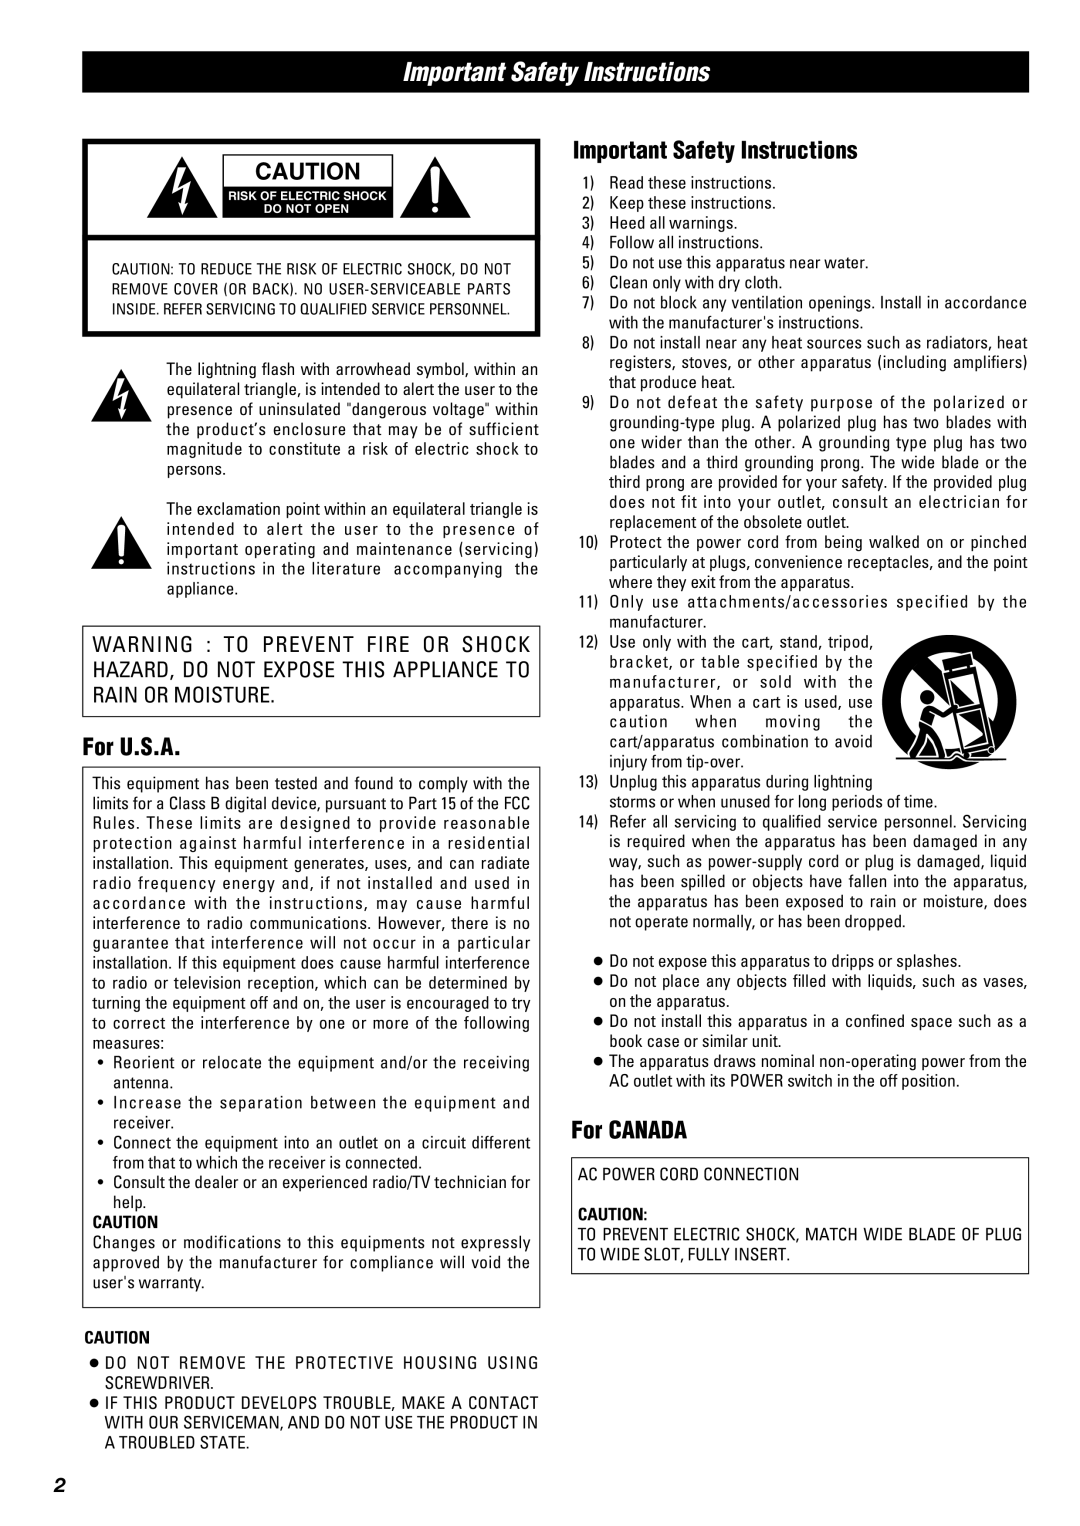 Xantech AM/FM Radio Tuner owner manual Important Safety Instructions, For U.S.A, For CANADA 